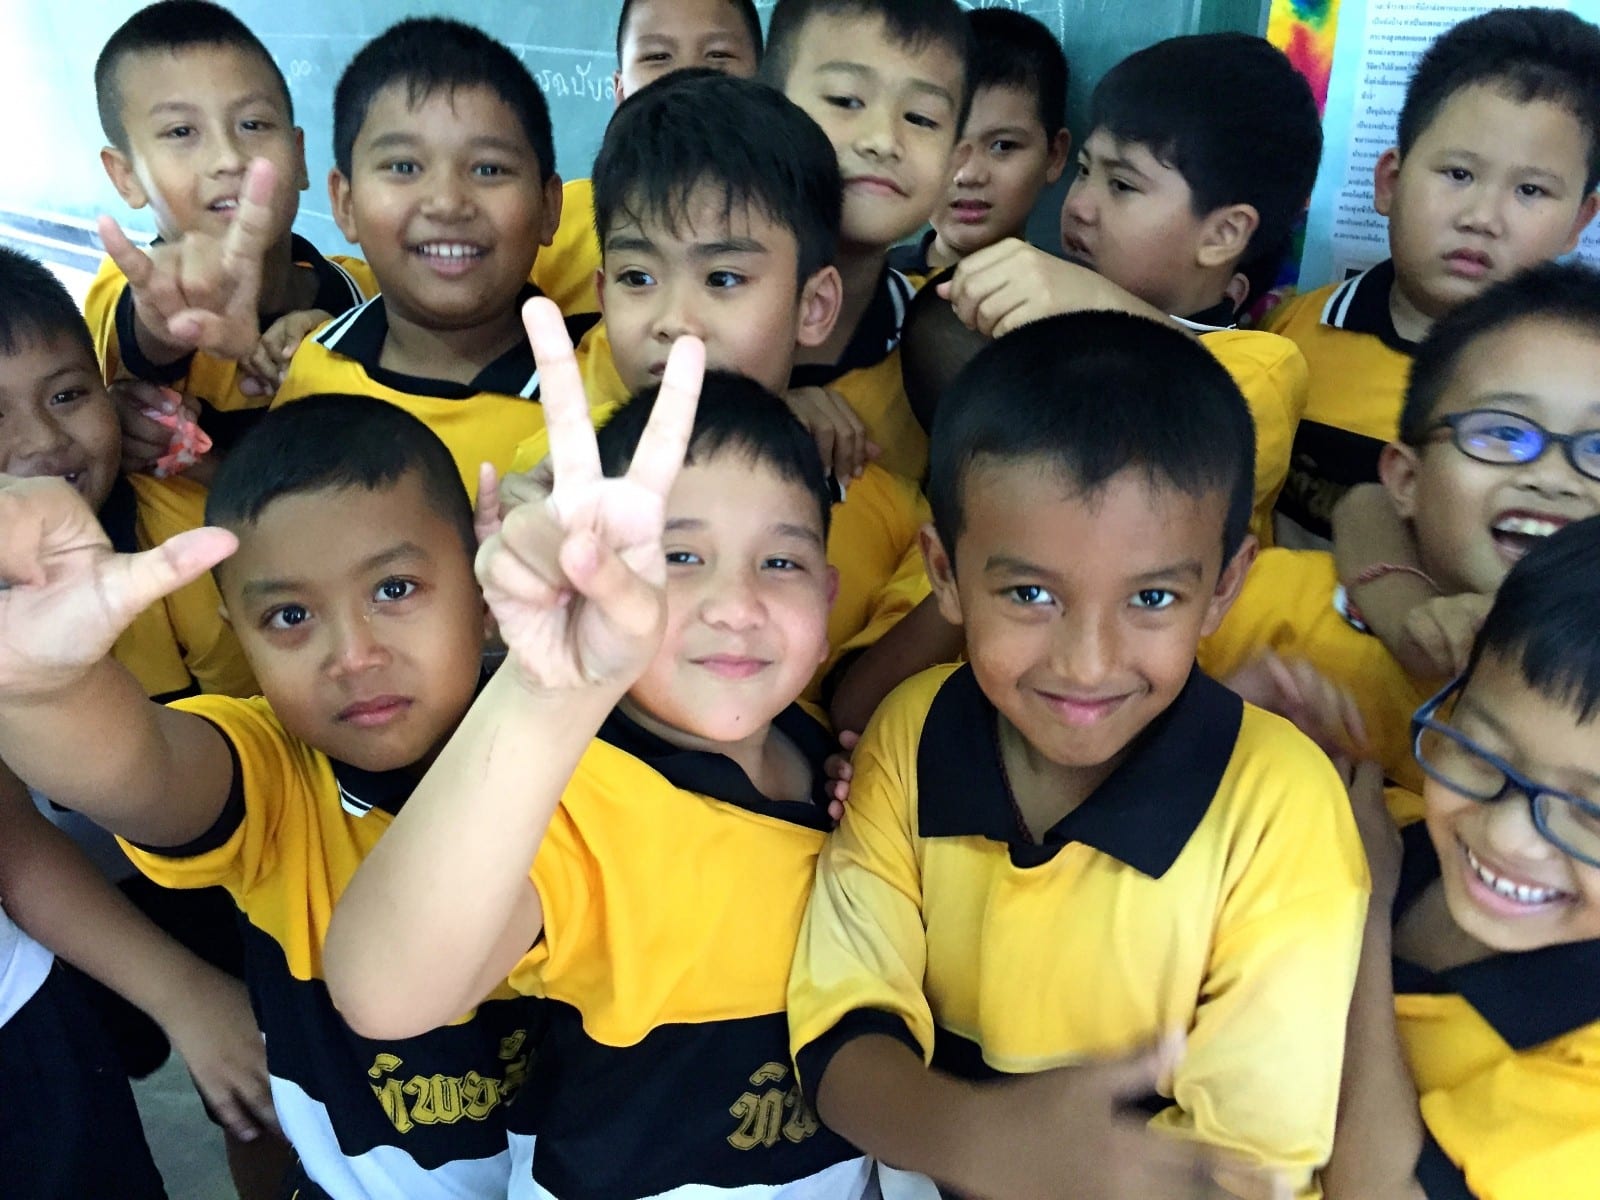 TESOL Thailand - Teaching English to Young Learners in Thailand